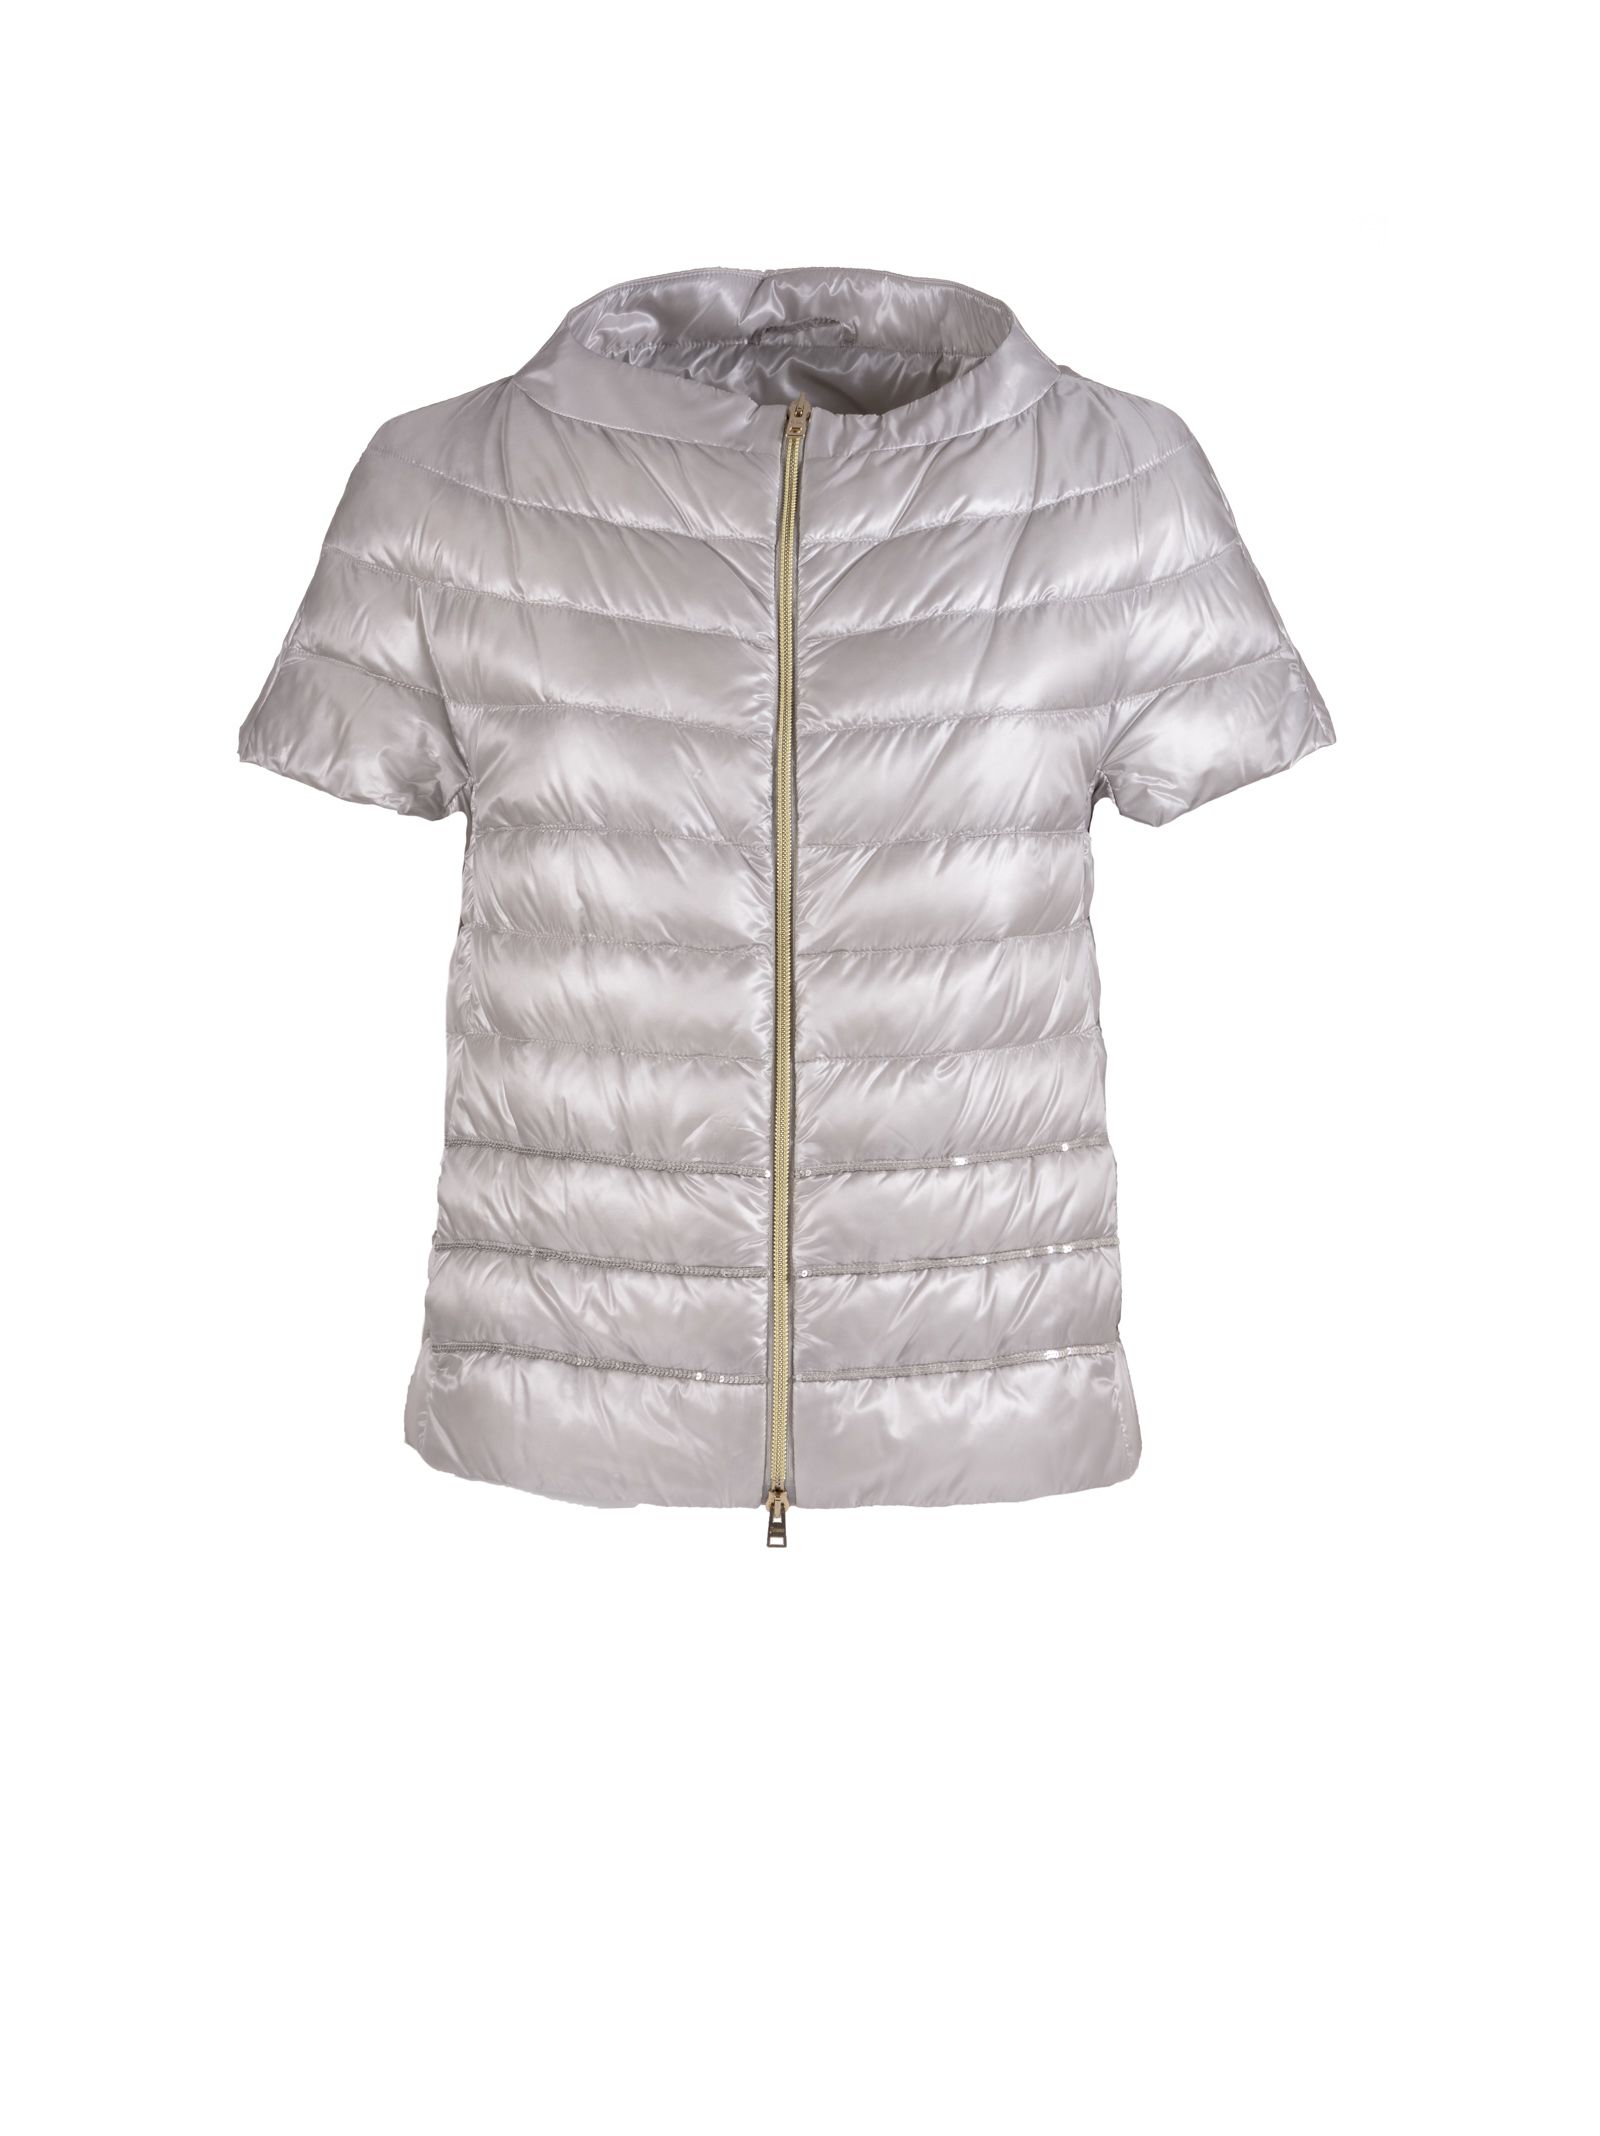 Herno - Herno Short Sleeve Down Jacket - Silver, Women's Down Jackets ...